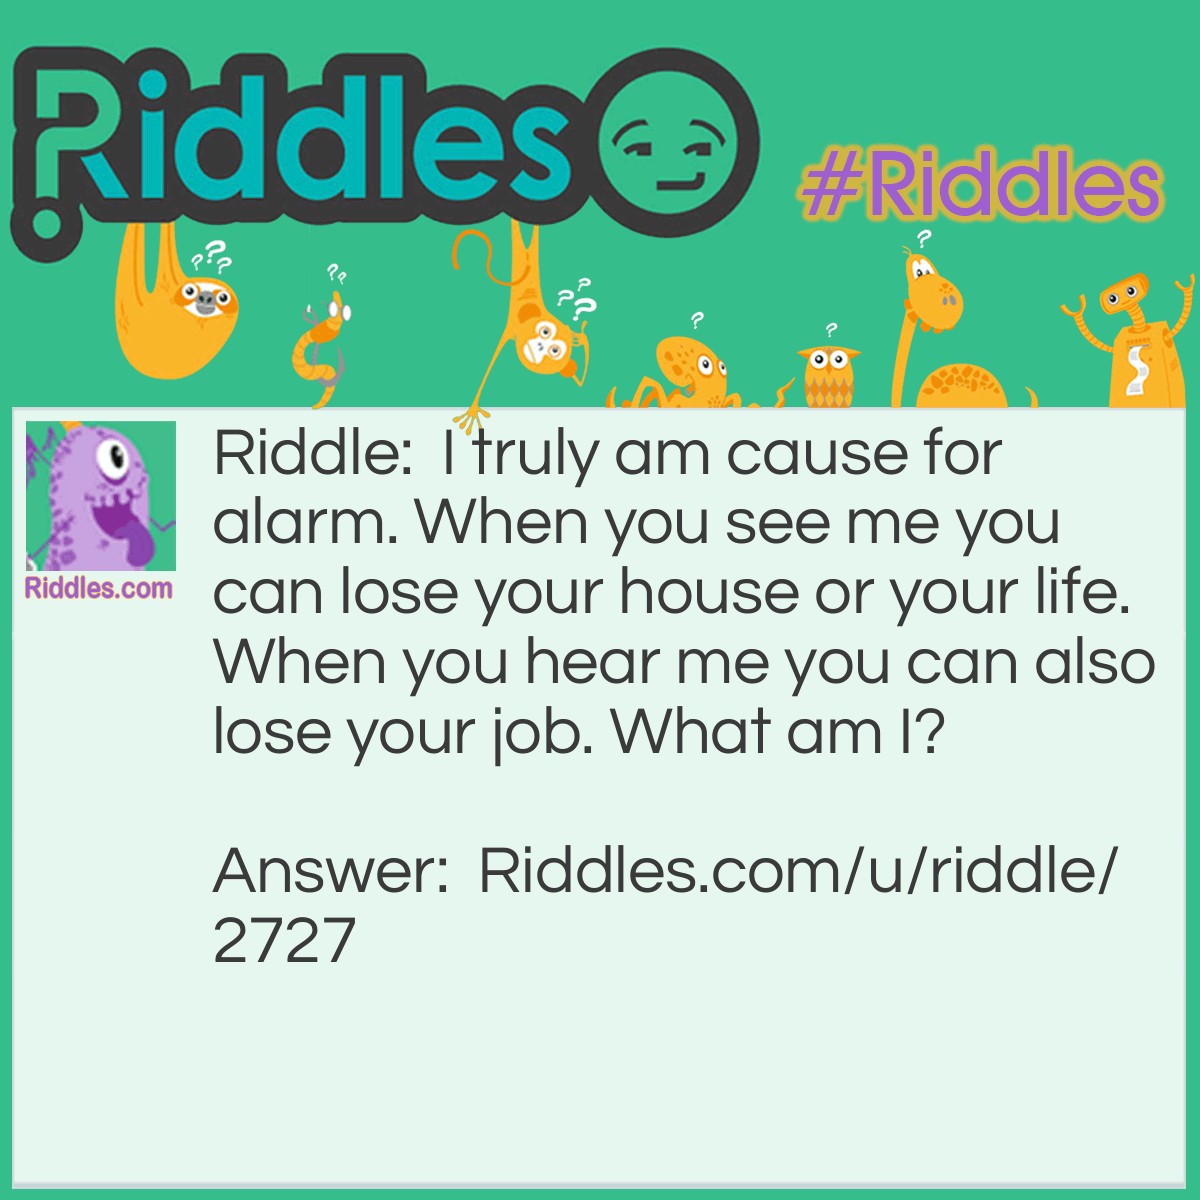 Riddle: I truly am cause for alarm. When you see me you can lose your house or your life. When you hear me you can also lose your job. What am I? Answer: Fire.